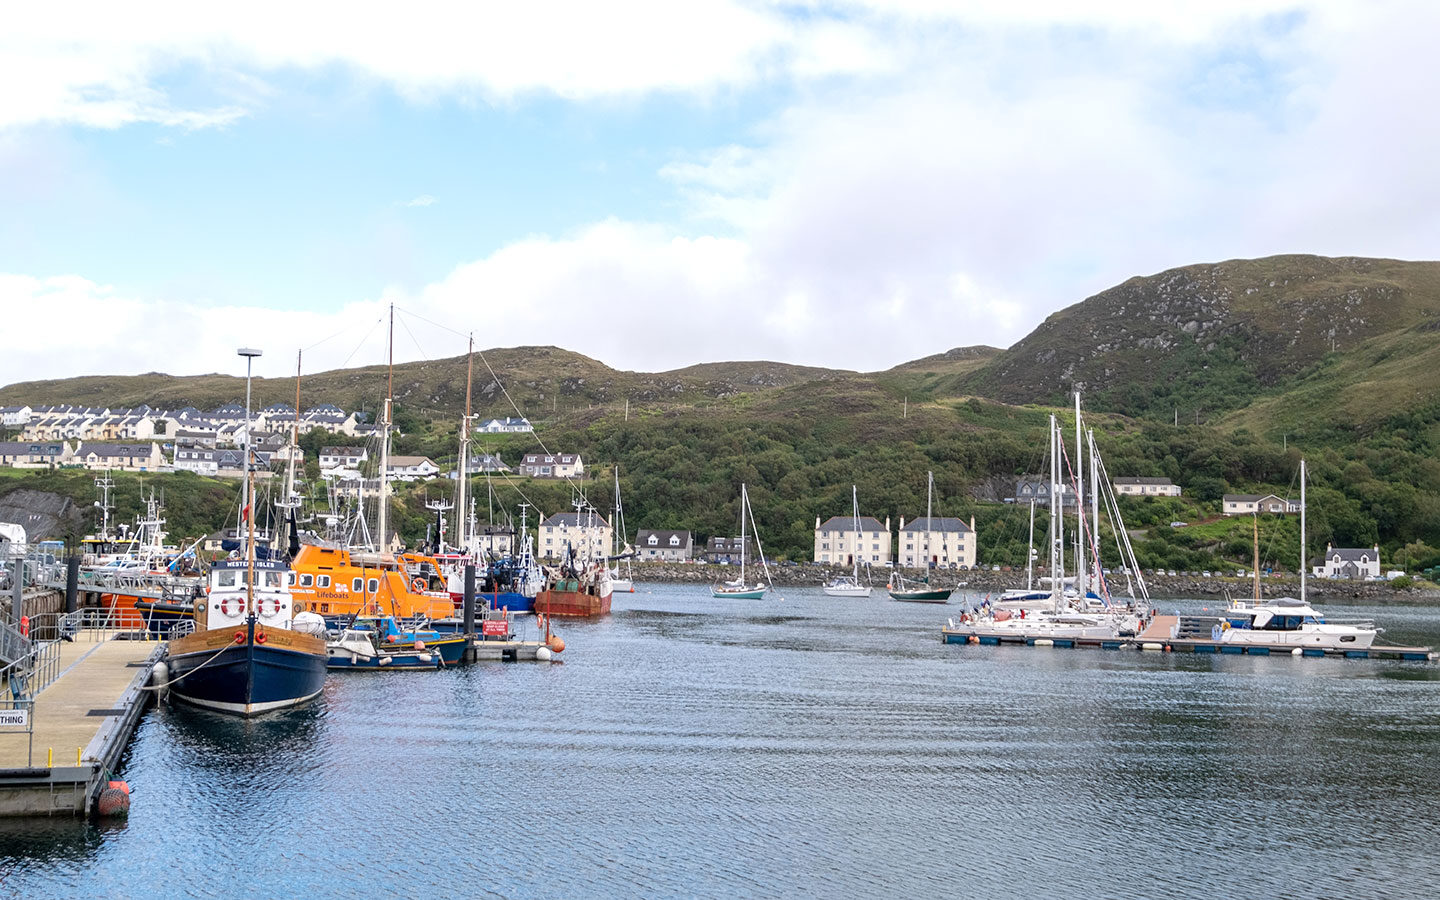 Boats in Mallaig harbour in the Scottish Highlands